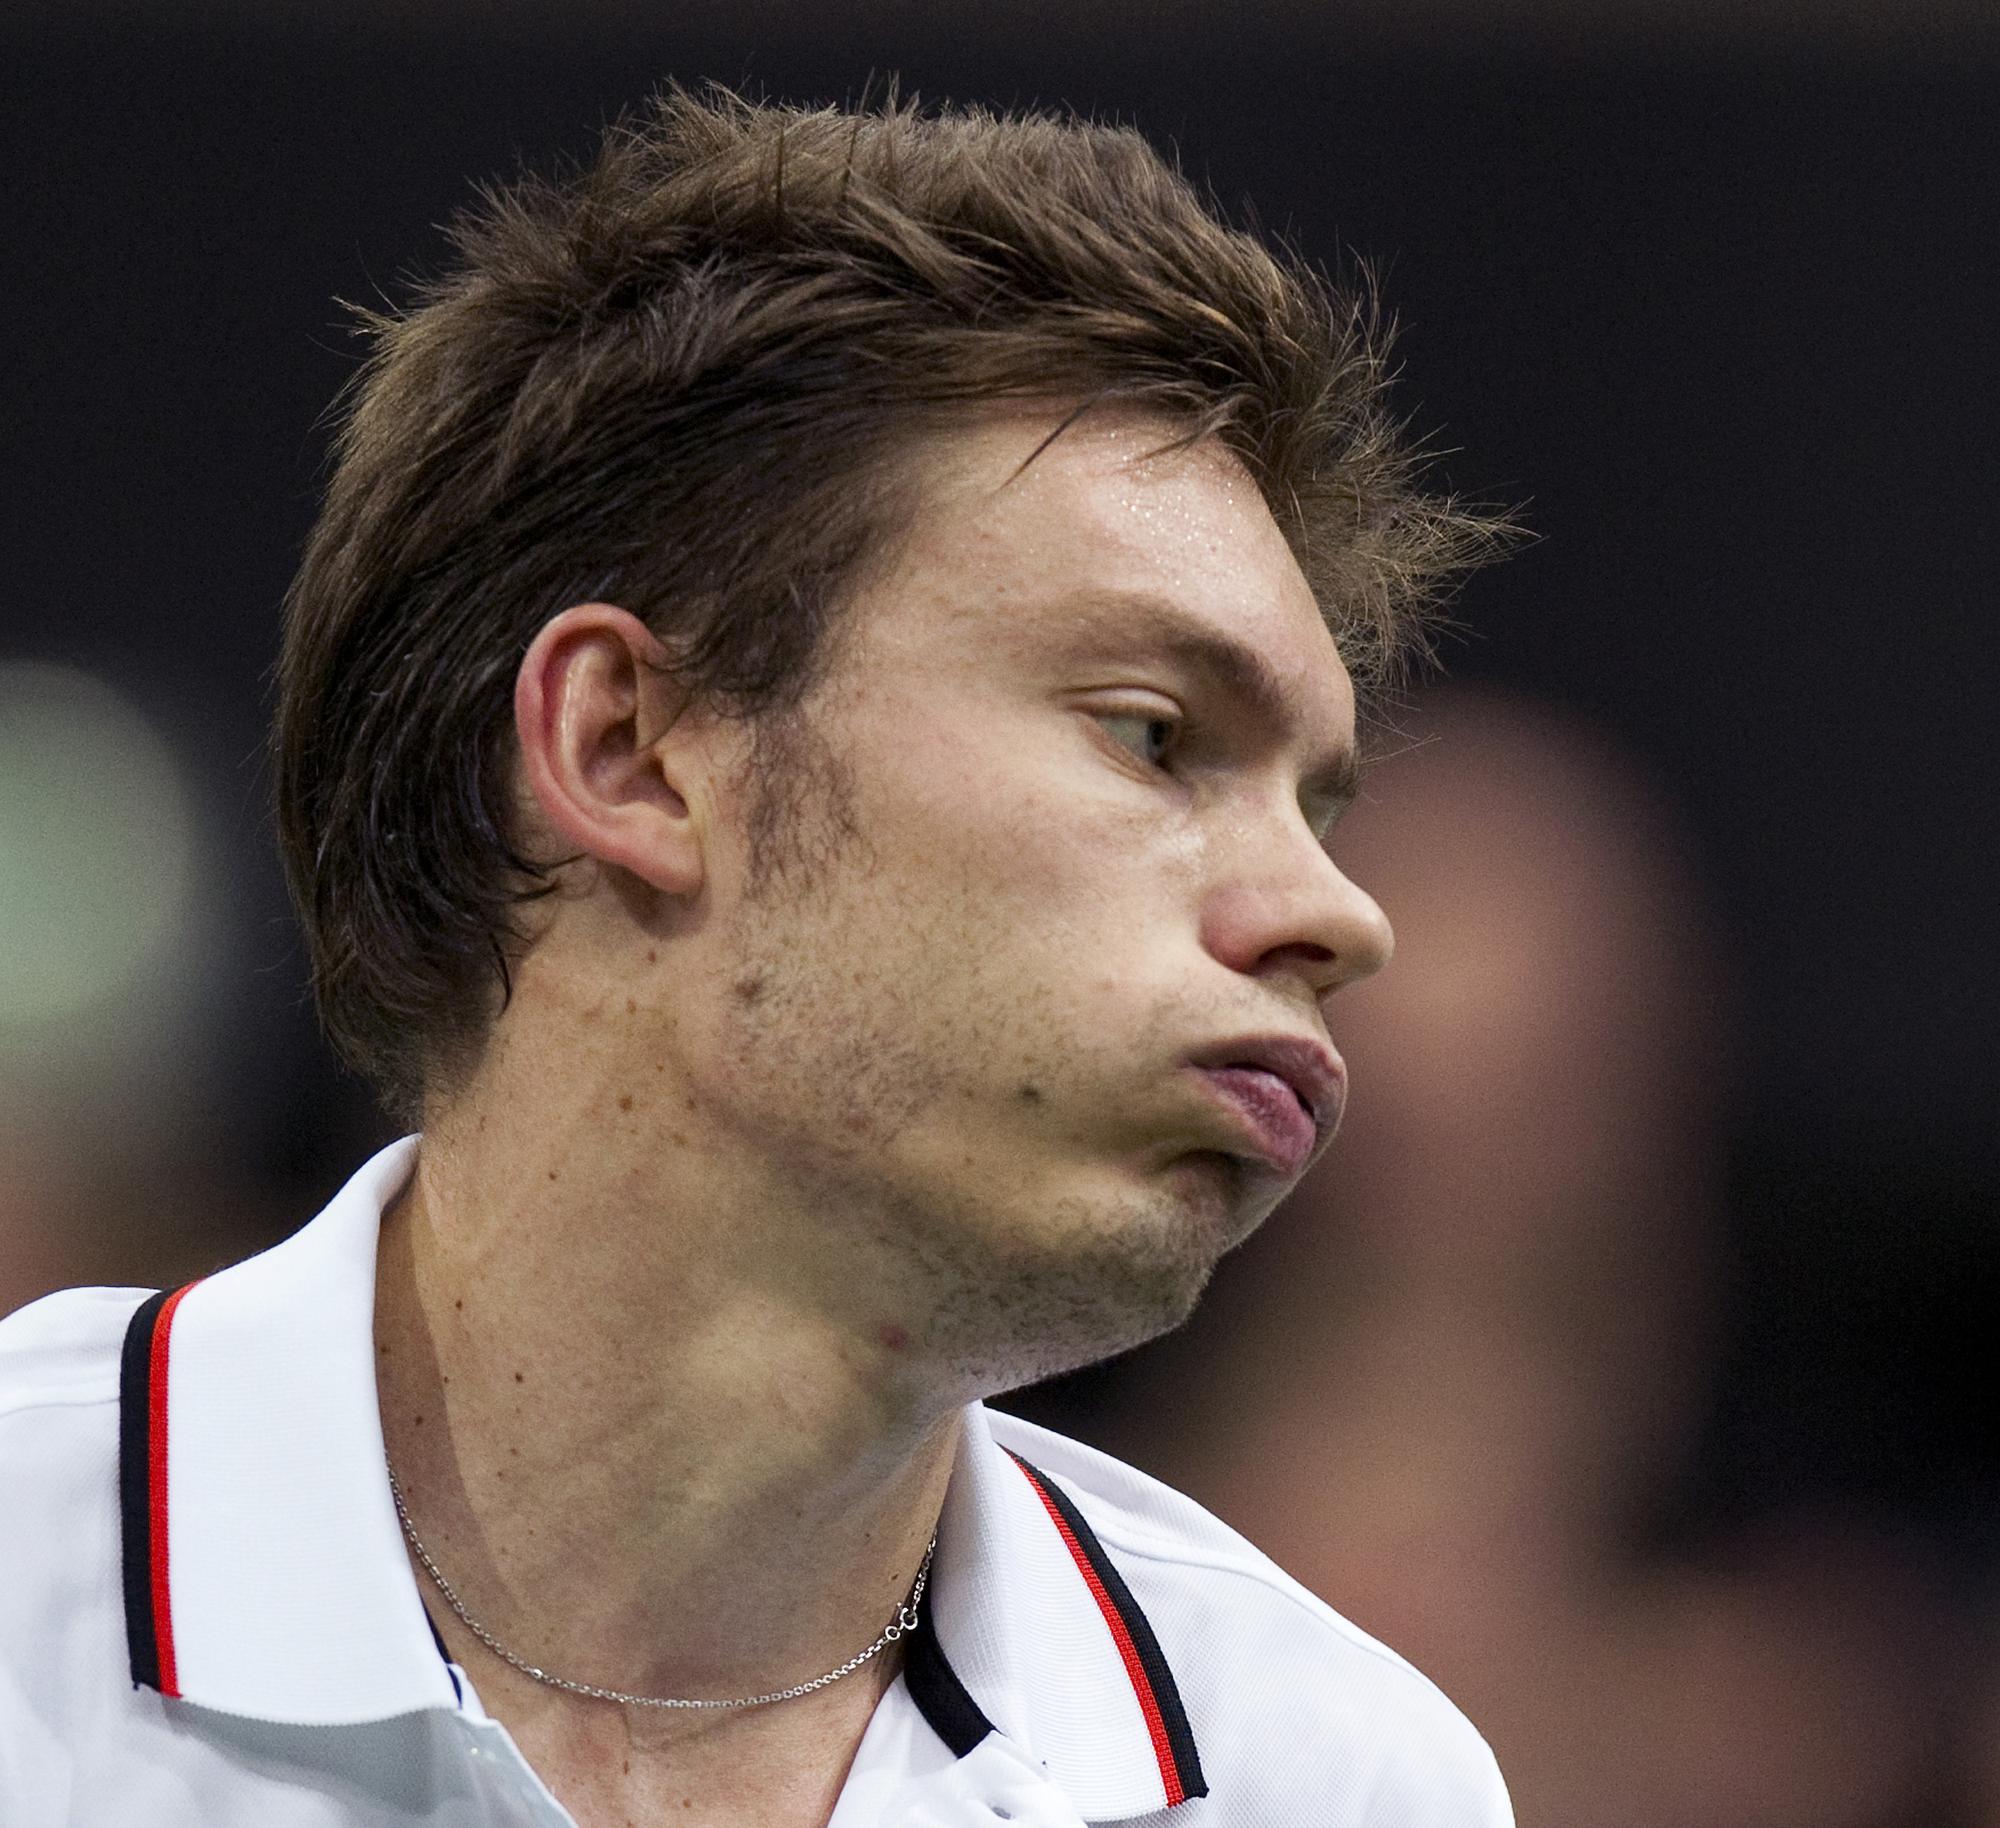 Nicolas Mahut of France reacts during his men's singles tennis match against Roger Federer of Switzerland at the World Indoor Tournament in Rotterdam February 15, 2012. Federer beat Mahut 6-4 6-4. REUTERS/Paul Vreeker/United Photos (NETHERLANDS - Tags: SPORT TENNIS) [Paul Vreeker]